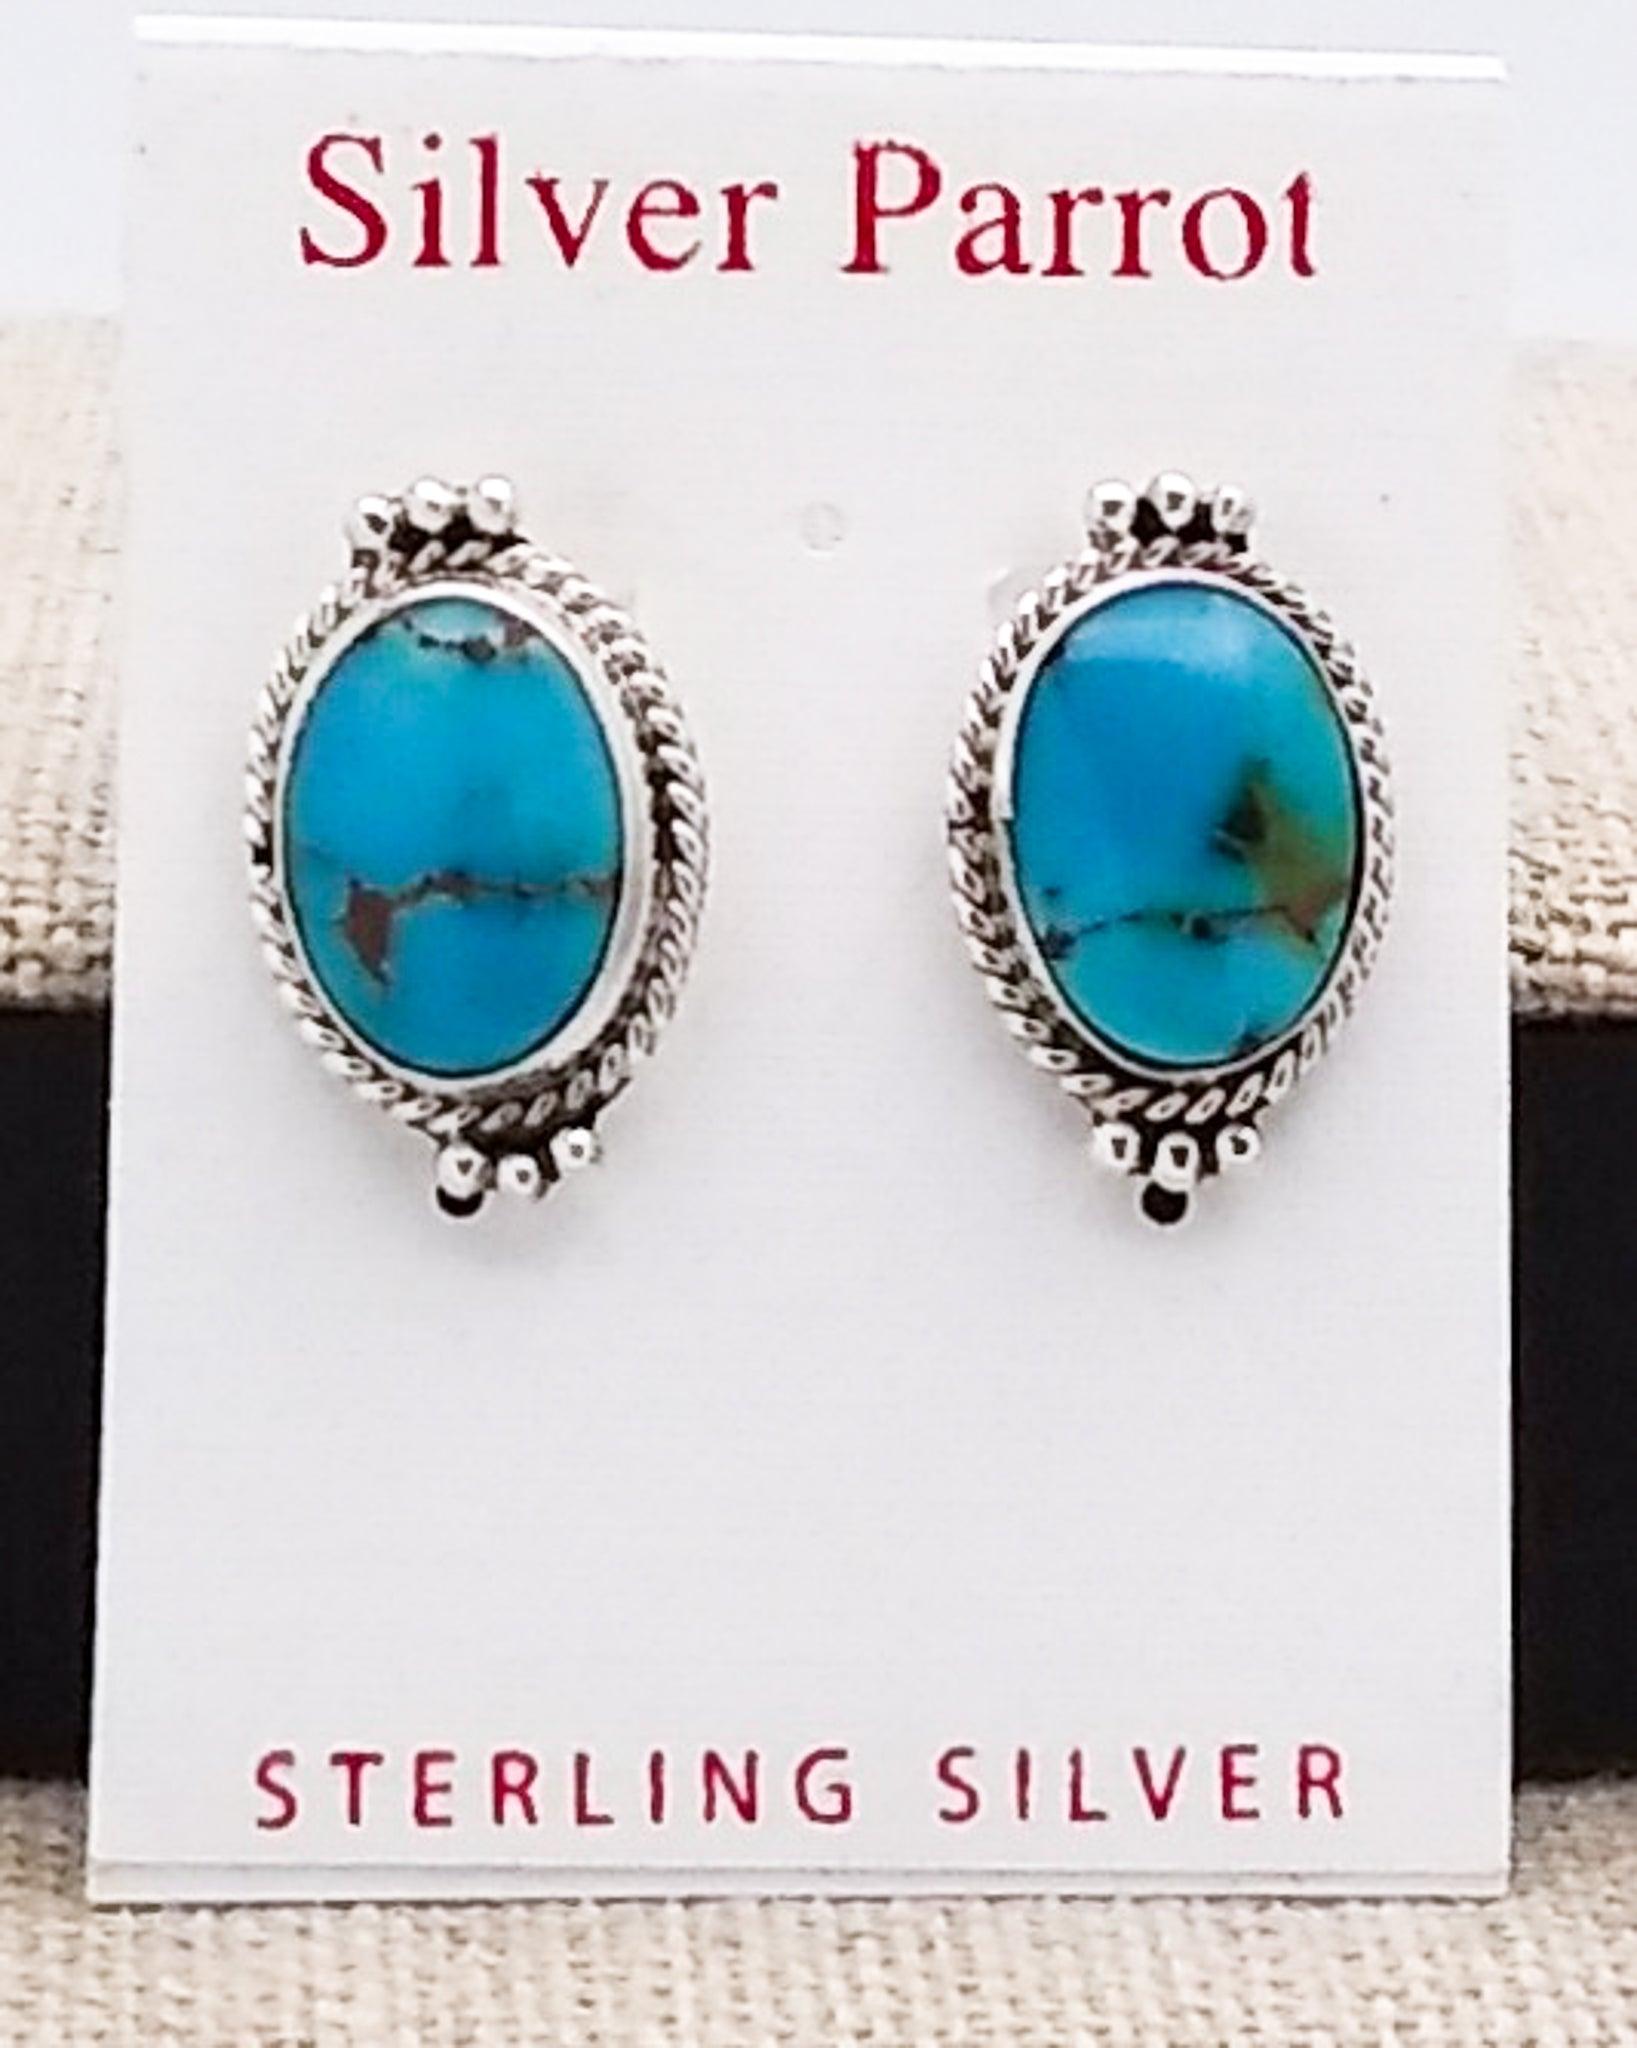 Sterling Navajo Studs With Turquoise - Silver Parrot, Inc. 